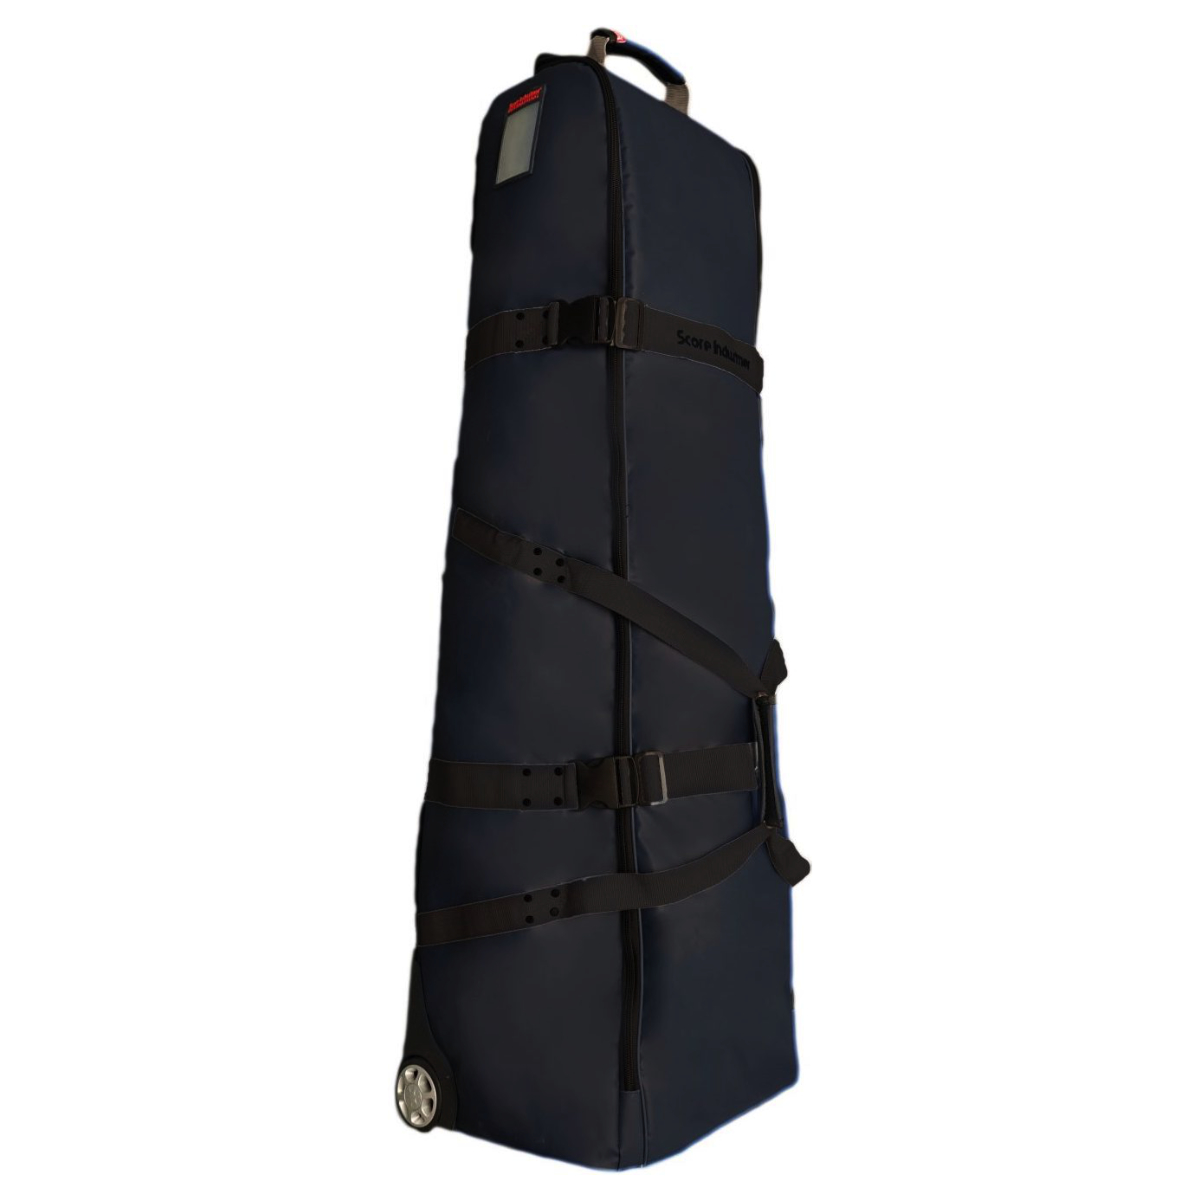 Score Industries PT 744 Black Travelcover